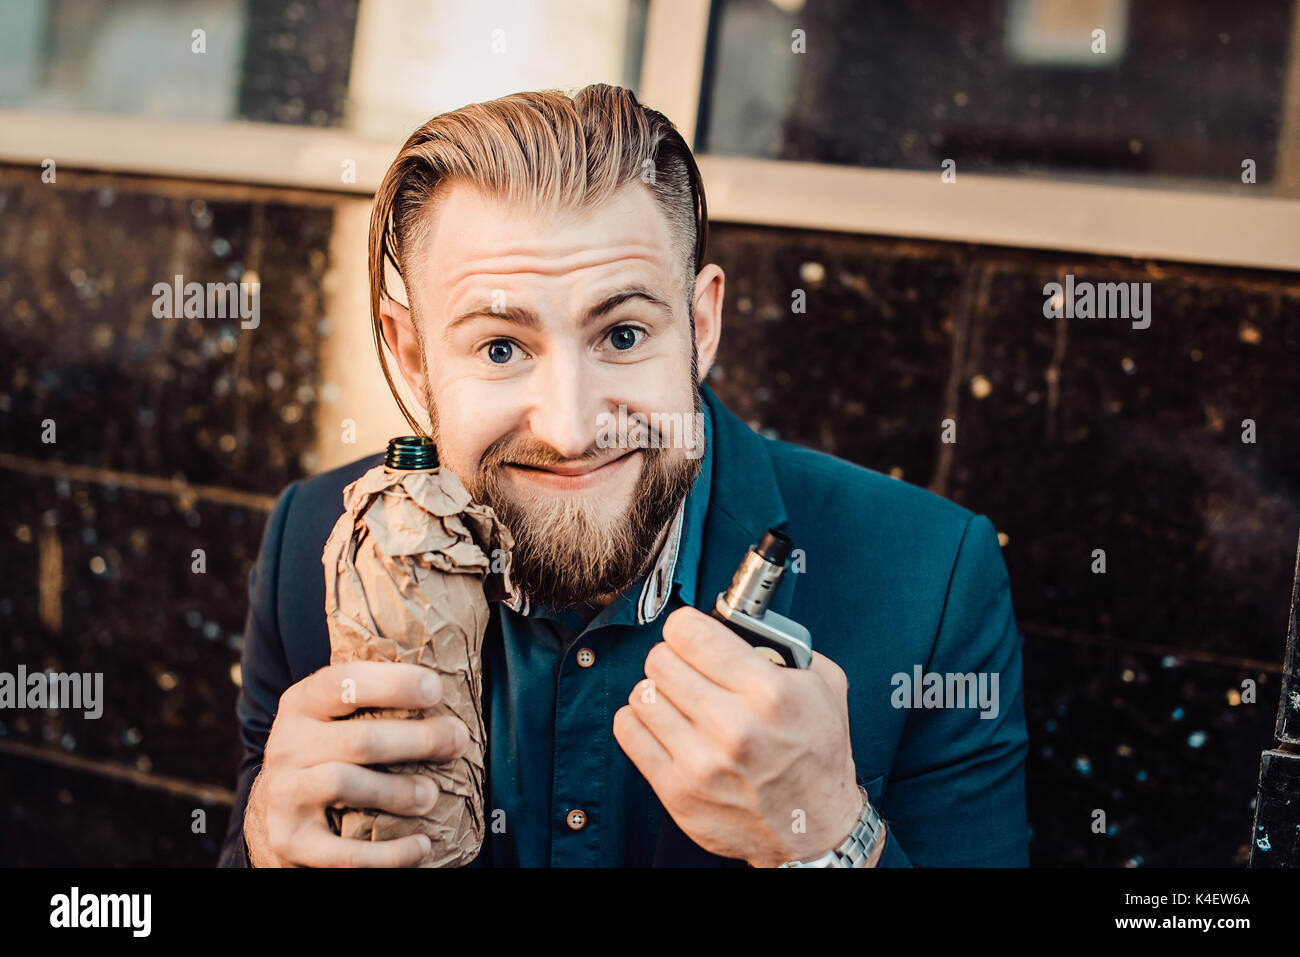 bearded man in a suit in the urban landscape with a bottle of something Stock Photo